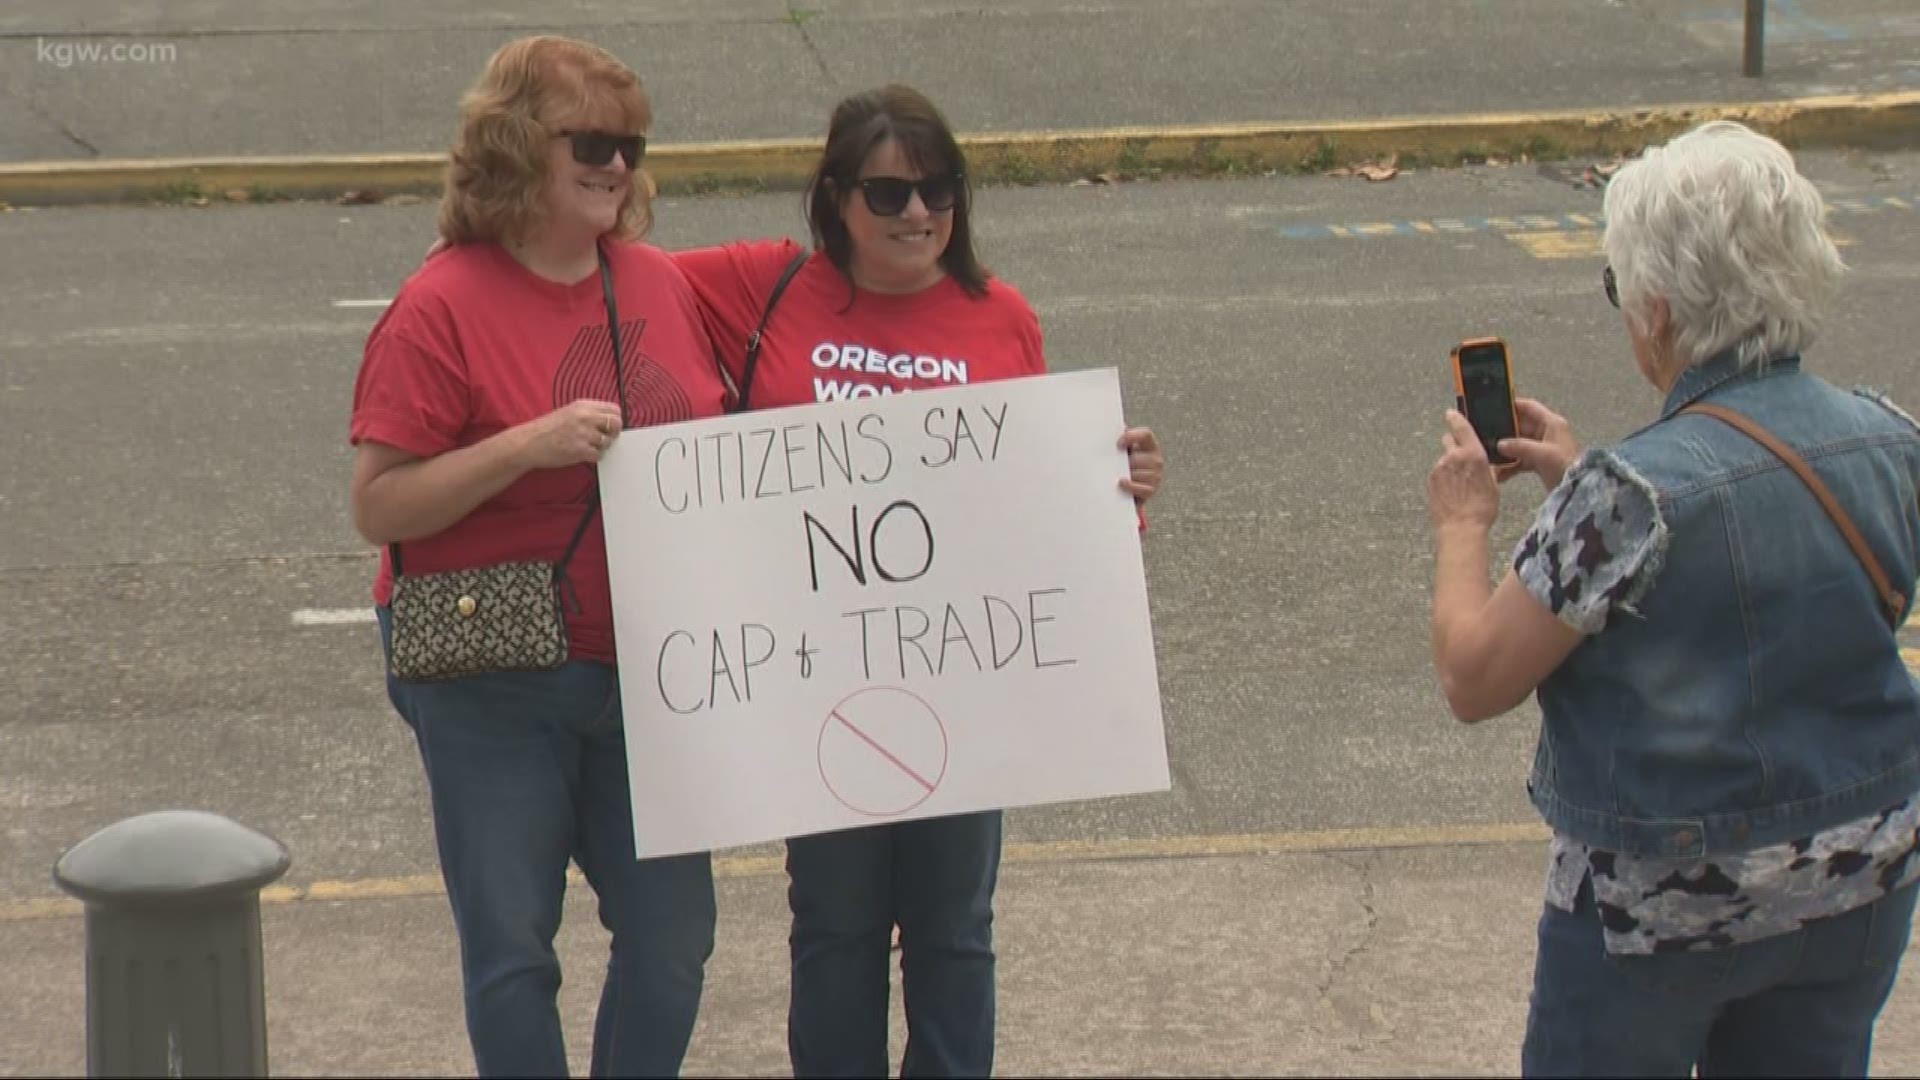 Protesters gathered in front of the Oregon State Capitol on Sunday, opposing a sweeping cap-and-trade bill and supporting Senate Republicans on Day 4 of the walkout. Many protesters said they – as voters – want the final say on HB 2020.